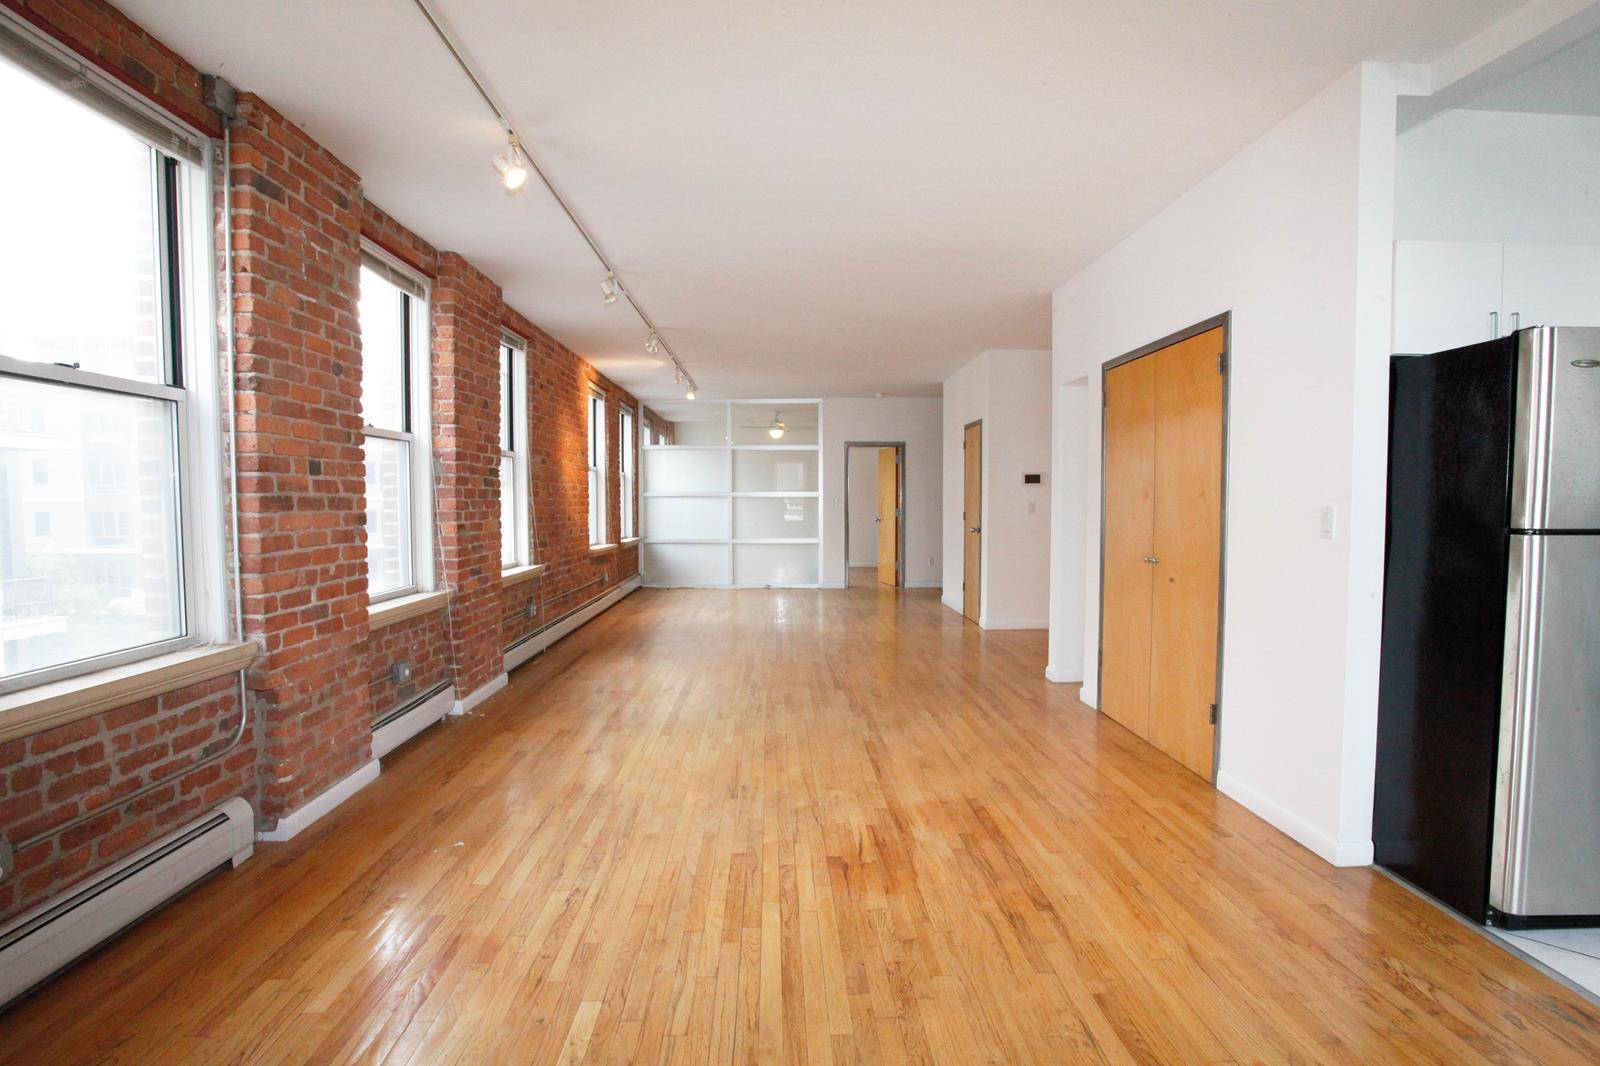 Huge authentic loft space with an abundance of large windows, exposed brick, high ceilings and plenty of open space to lay out however you want.